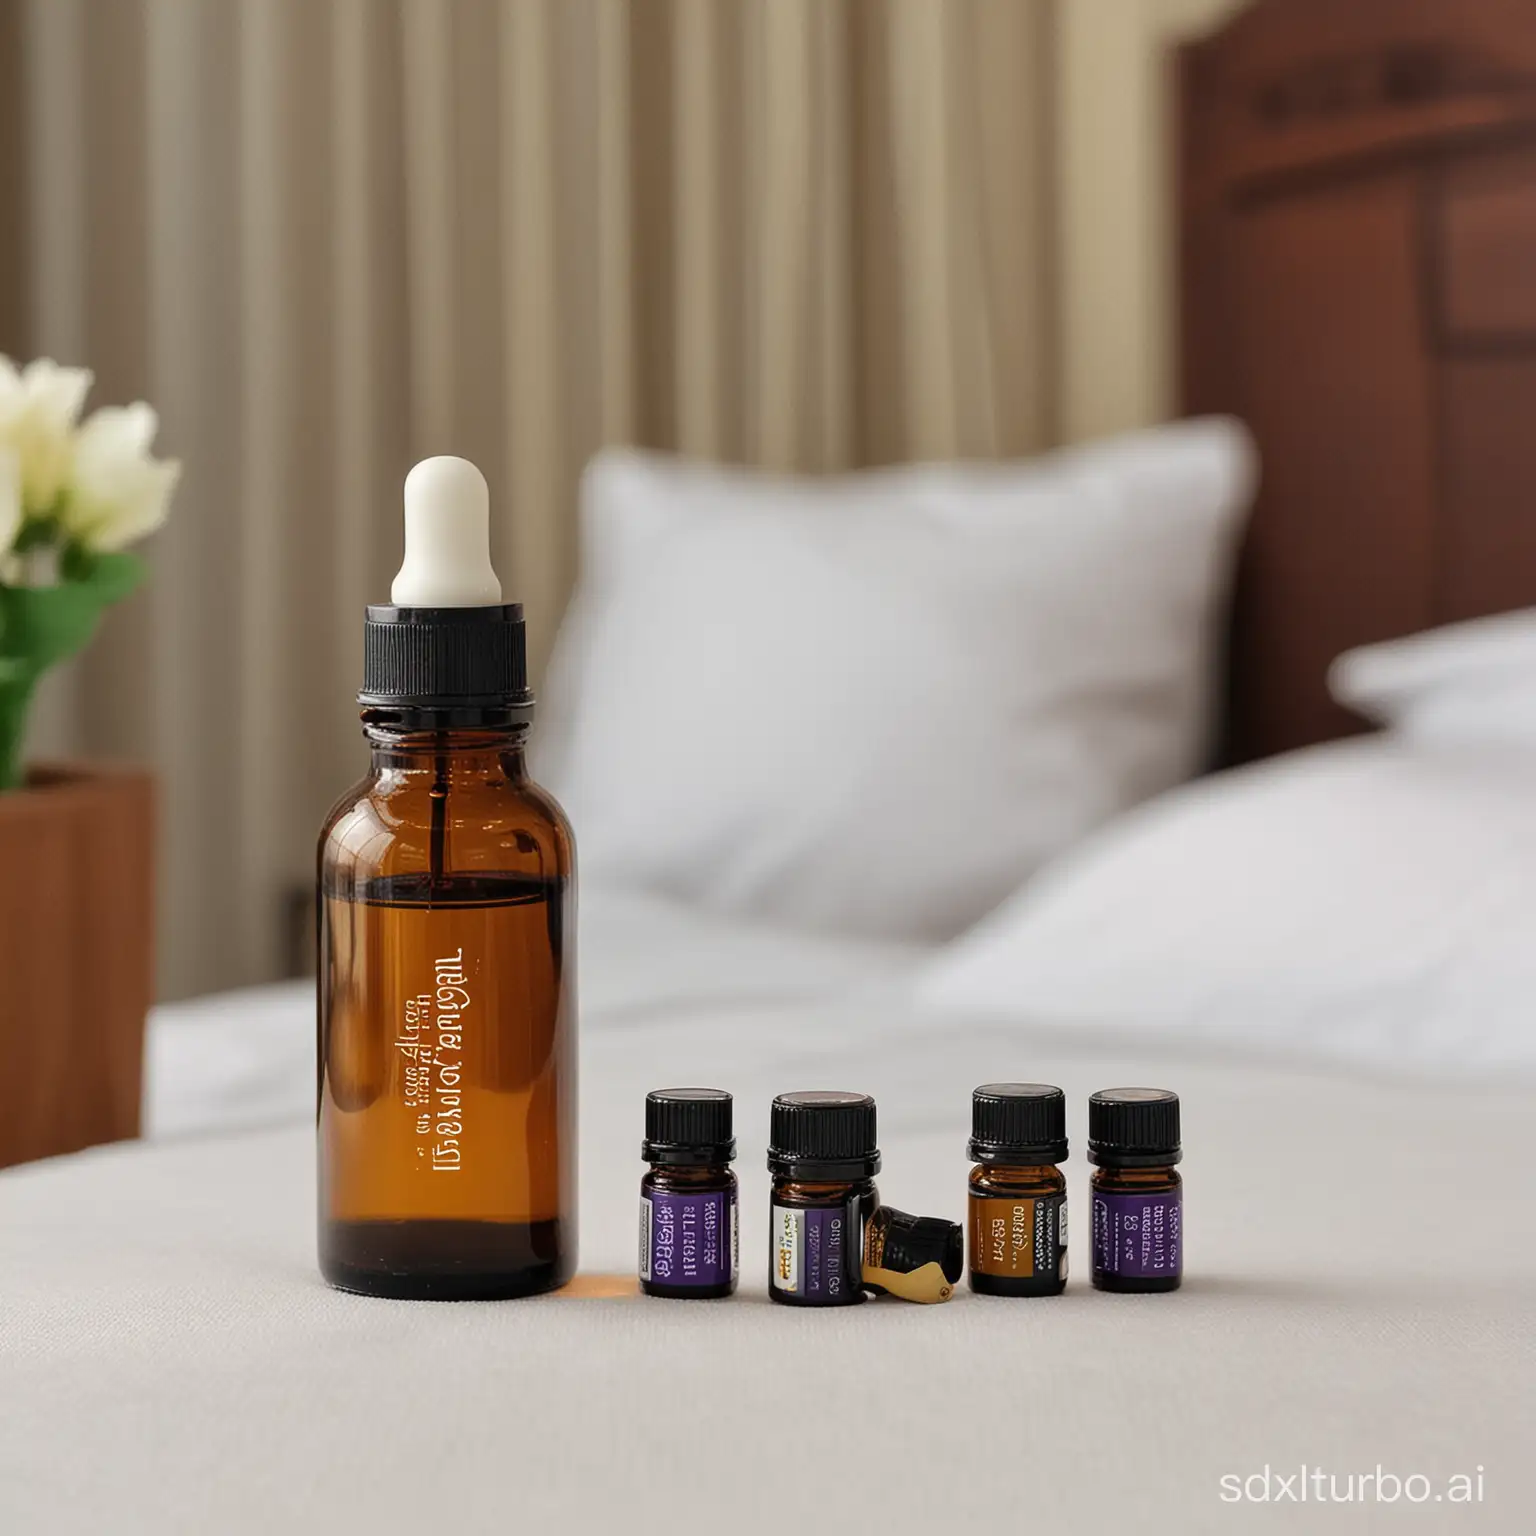 Luxurious-Hotel-Room-with-Aromatic-Essential-Oil-Bottle